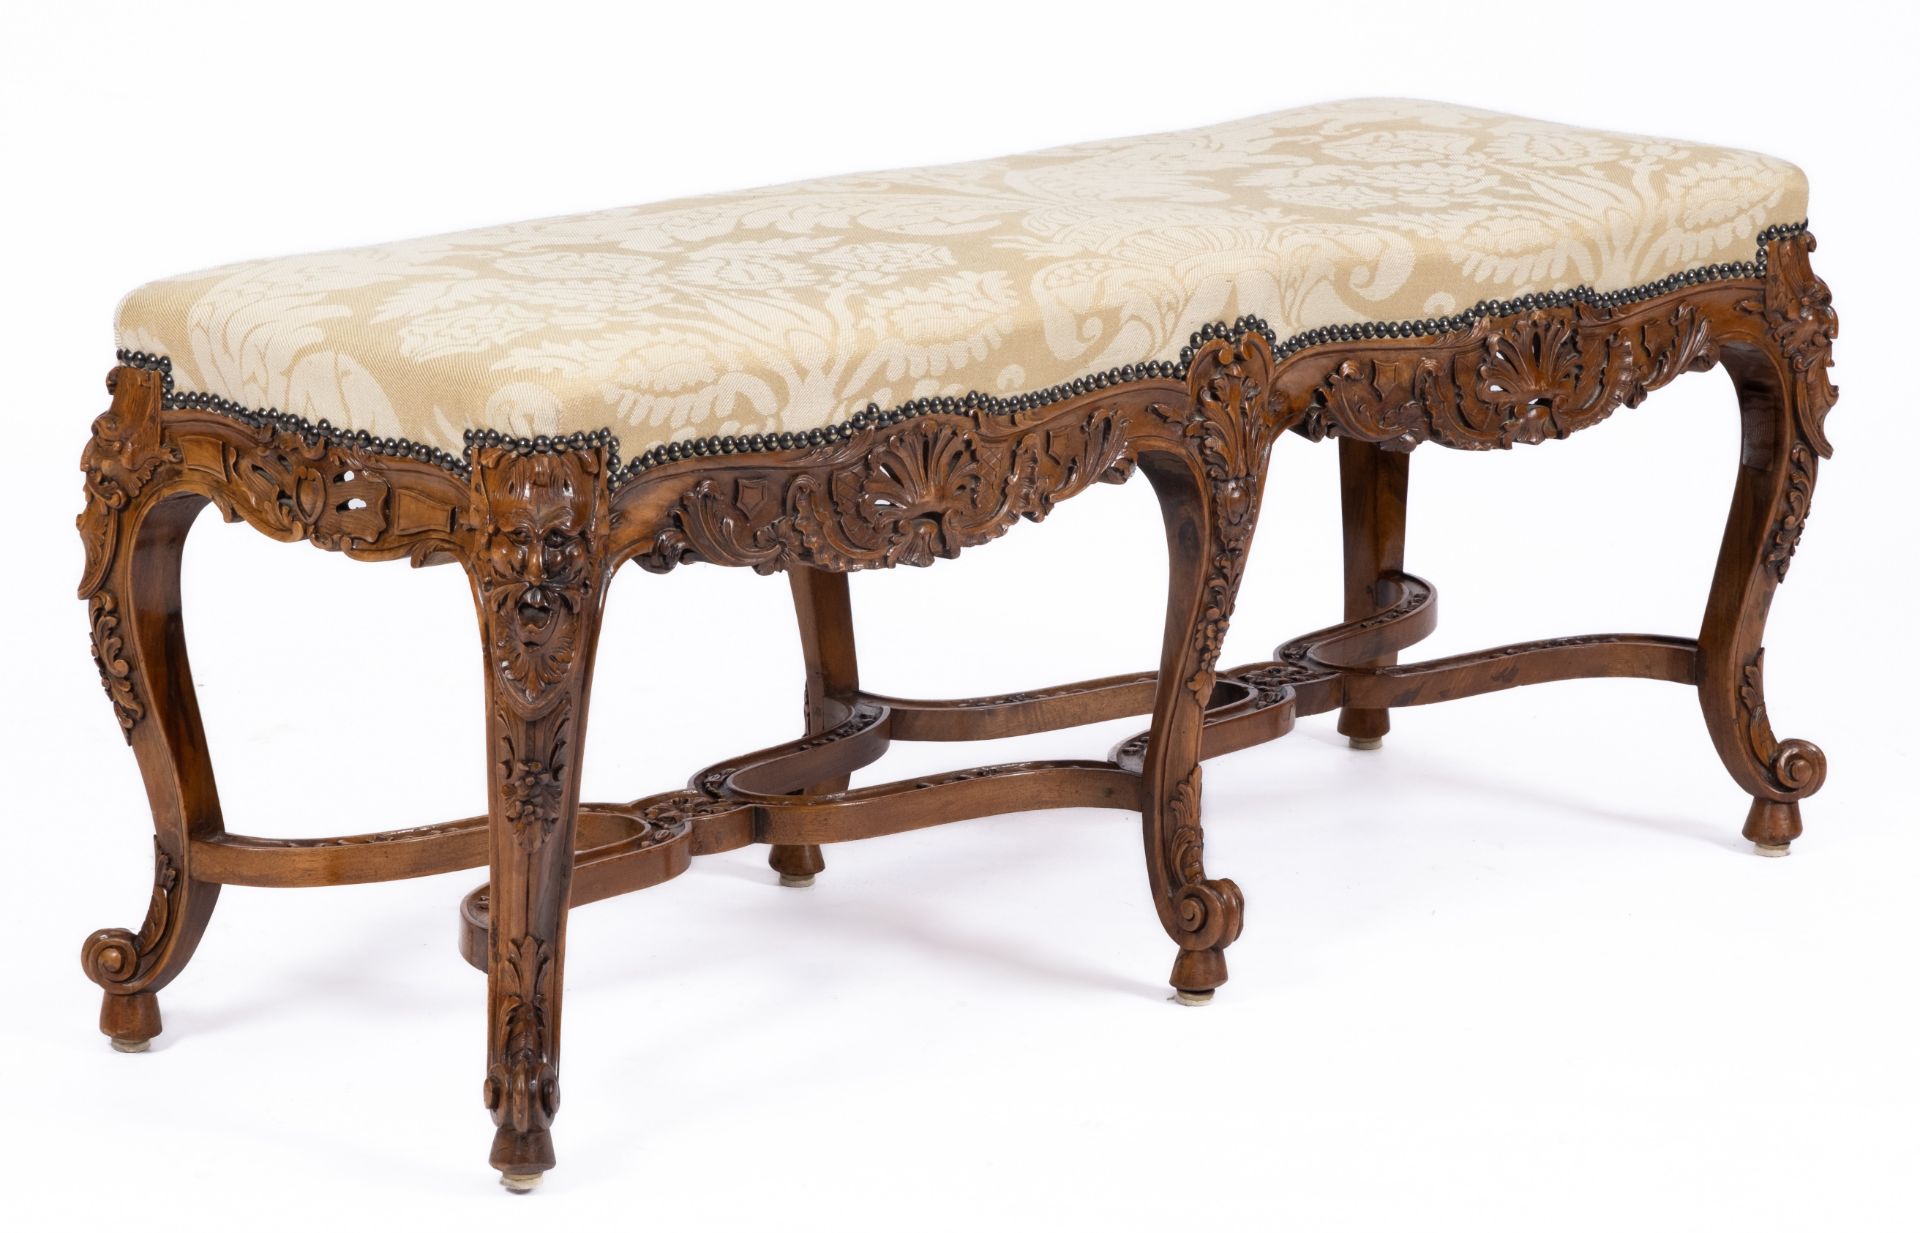 A French carved walnut banquette